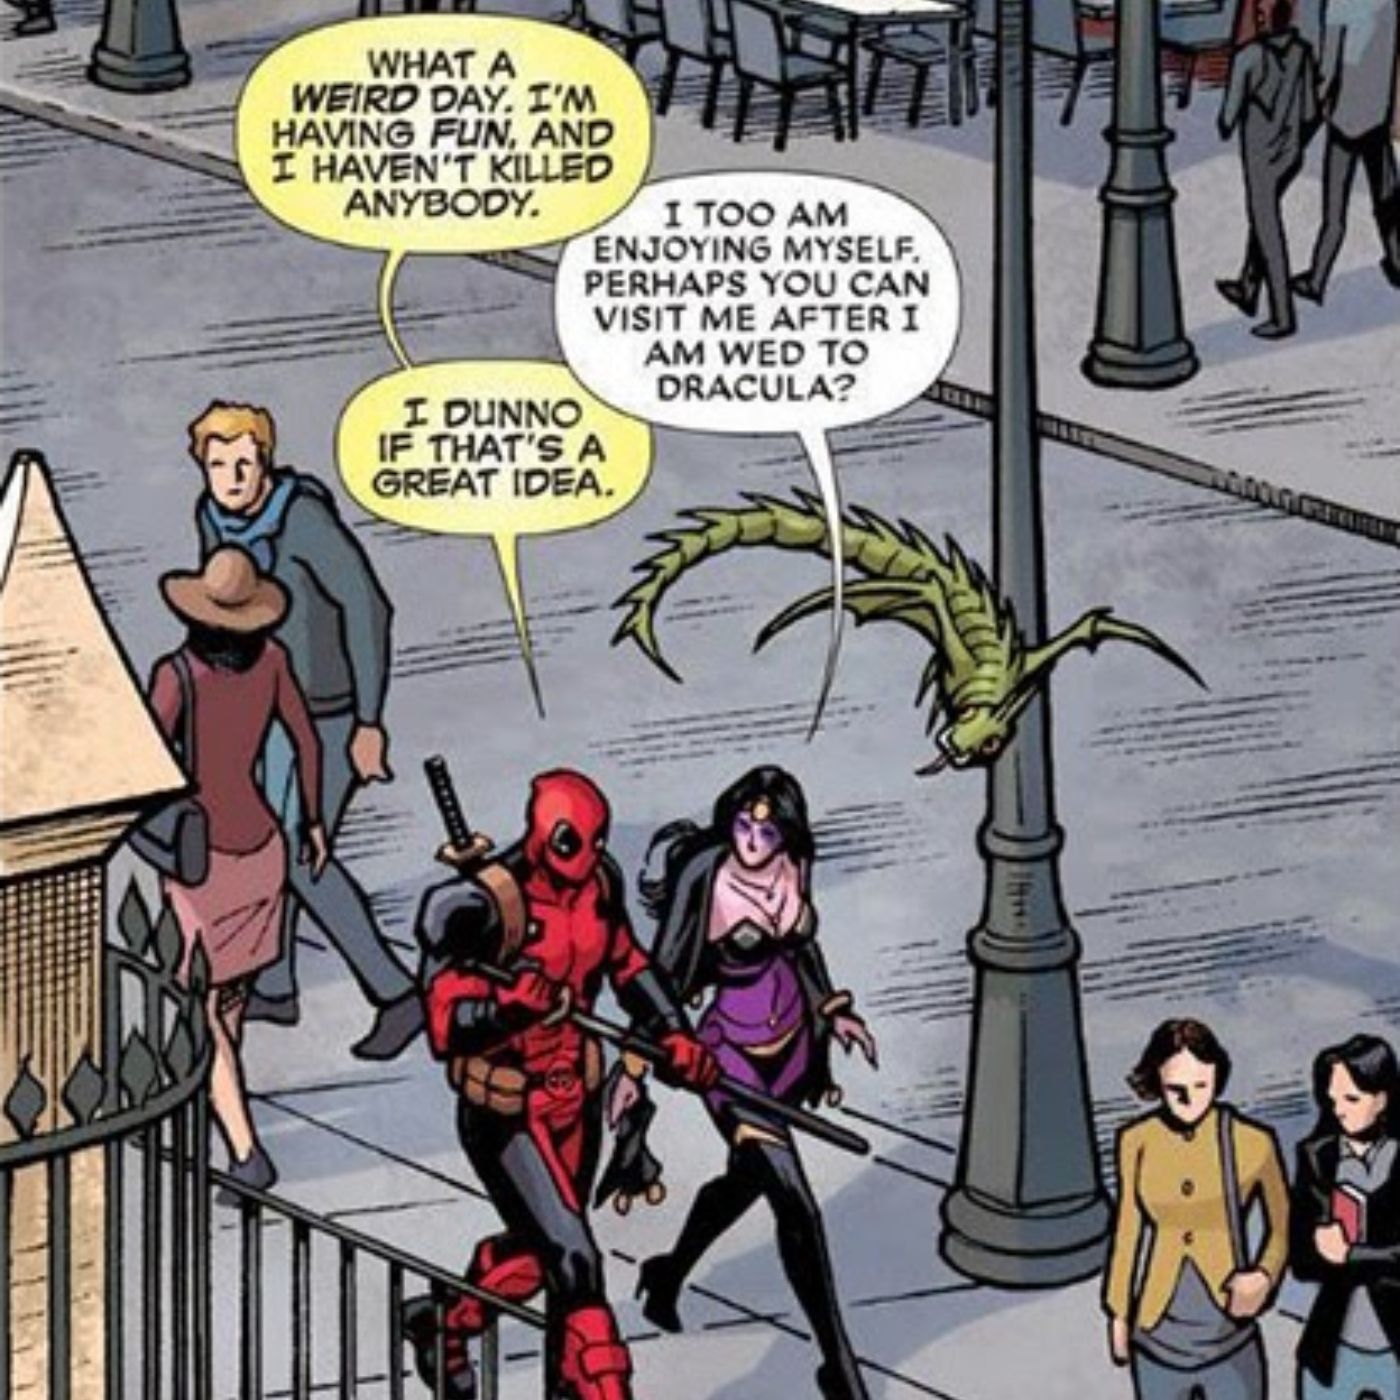 Deadpool having a fun day with the bride of Dracula.